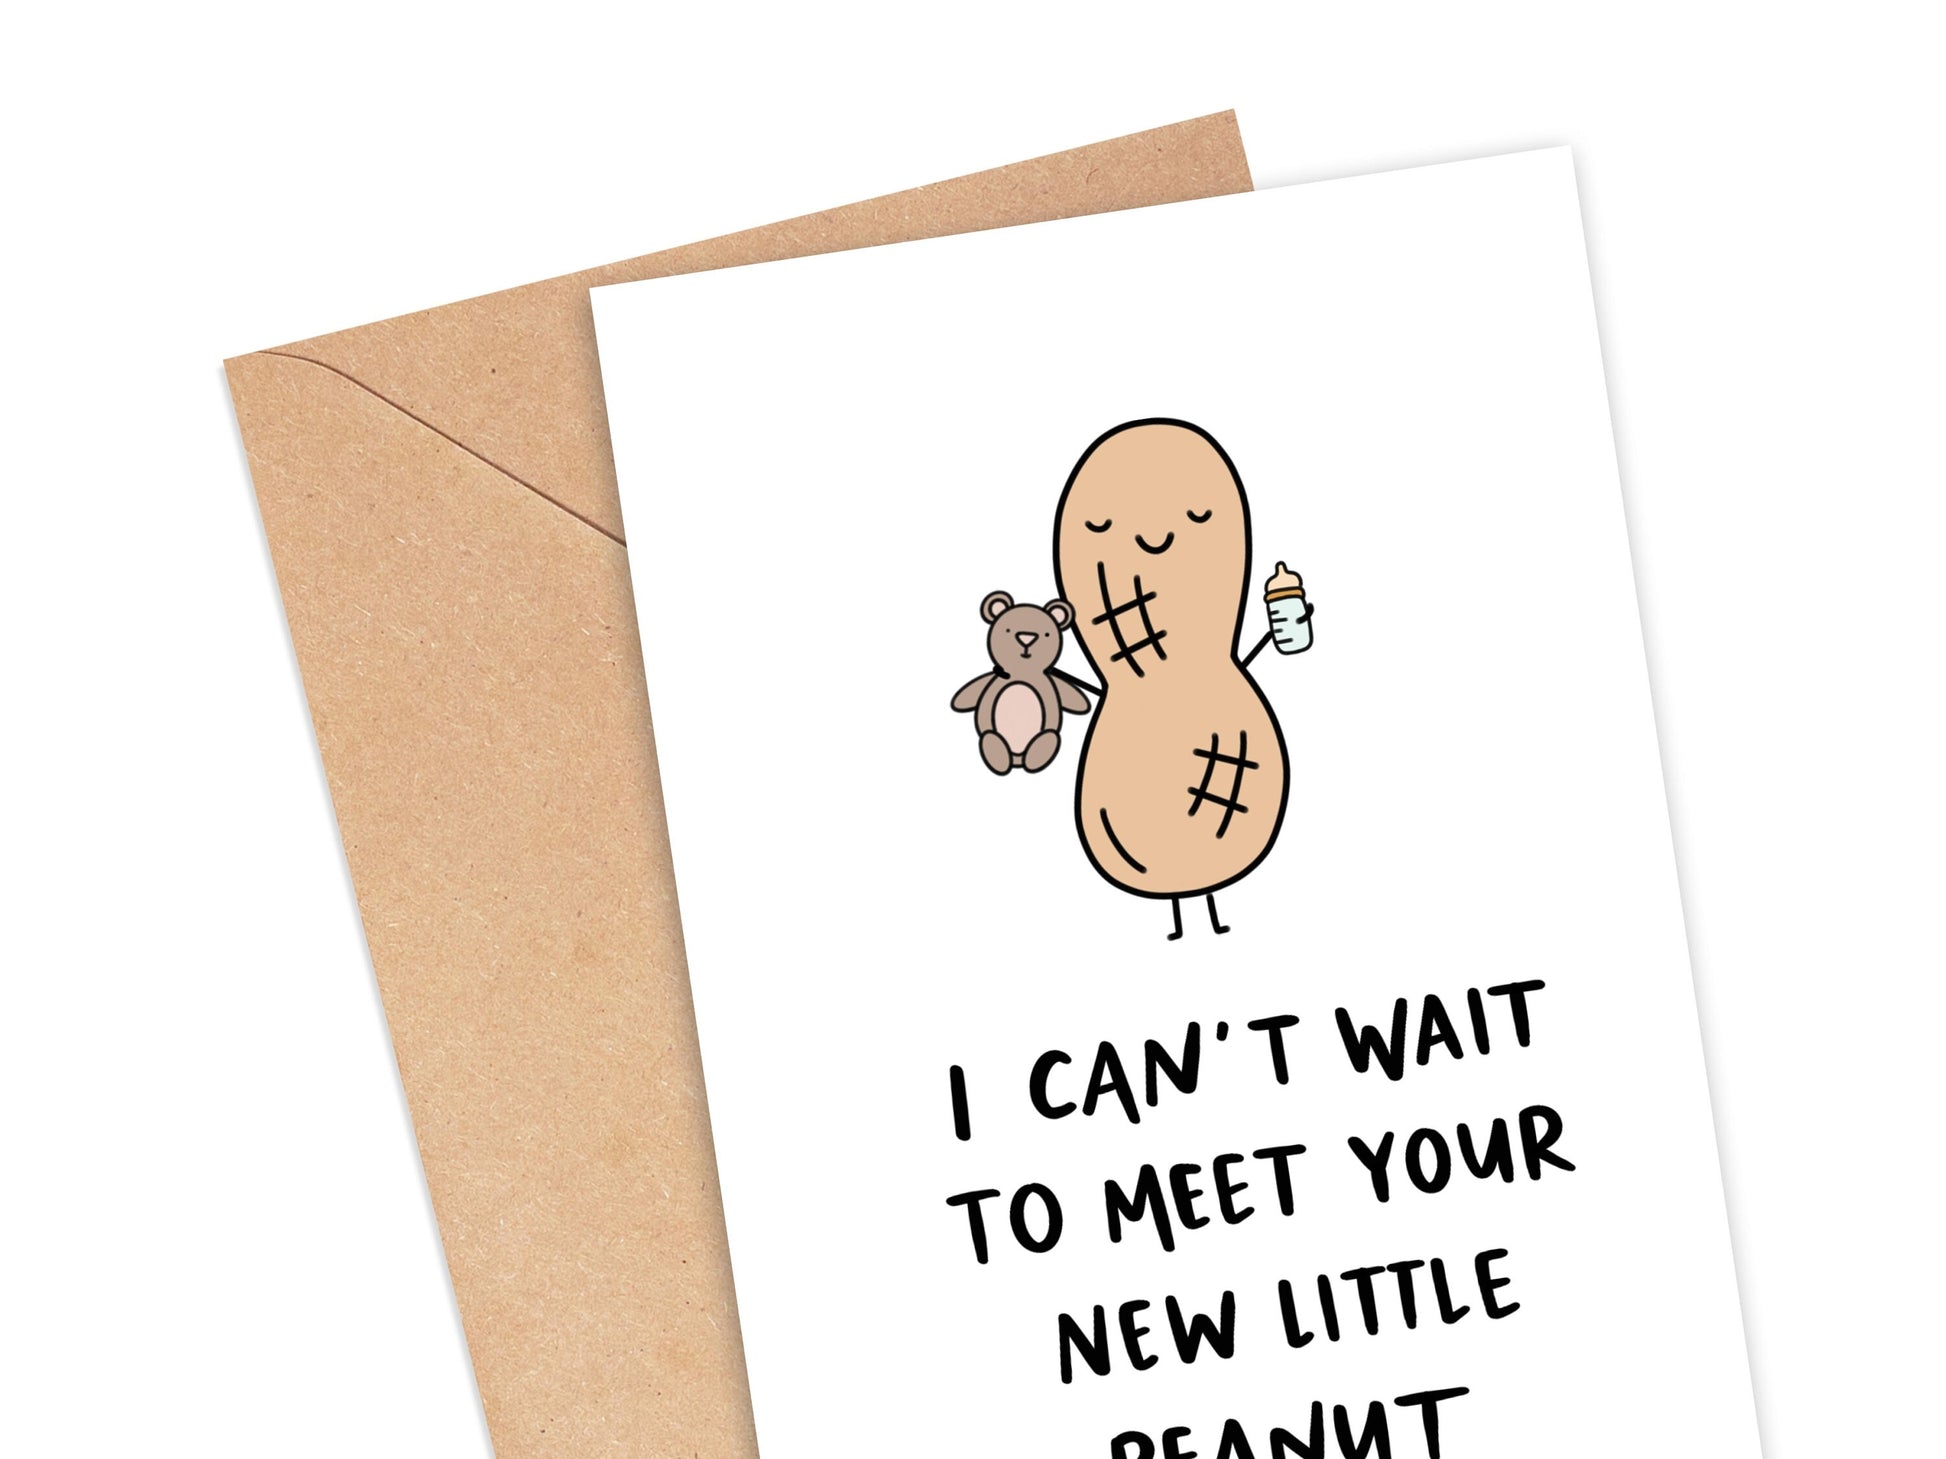 I Can't Wait to Meet Your New Little Peanut Card Simply Happy Cards